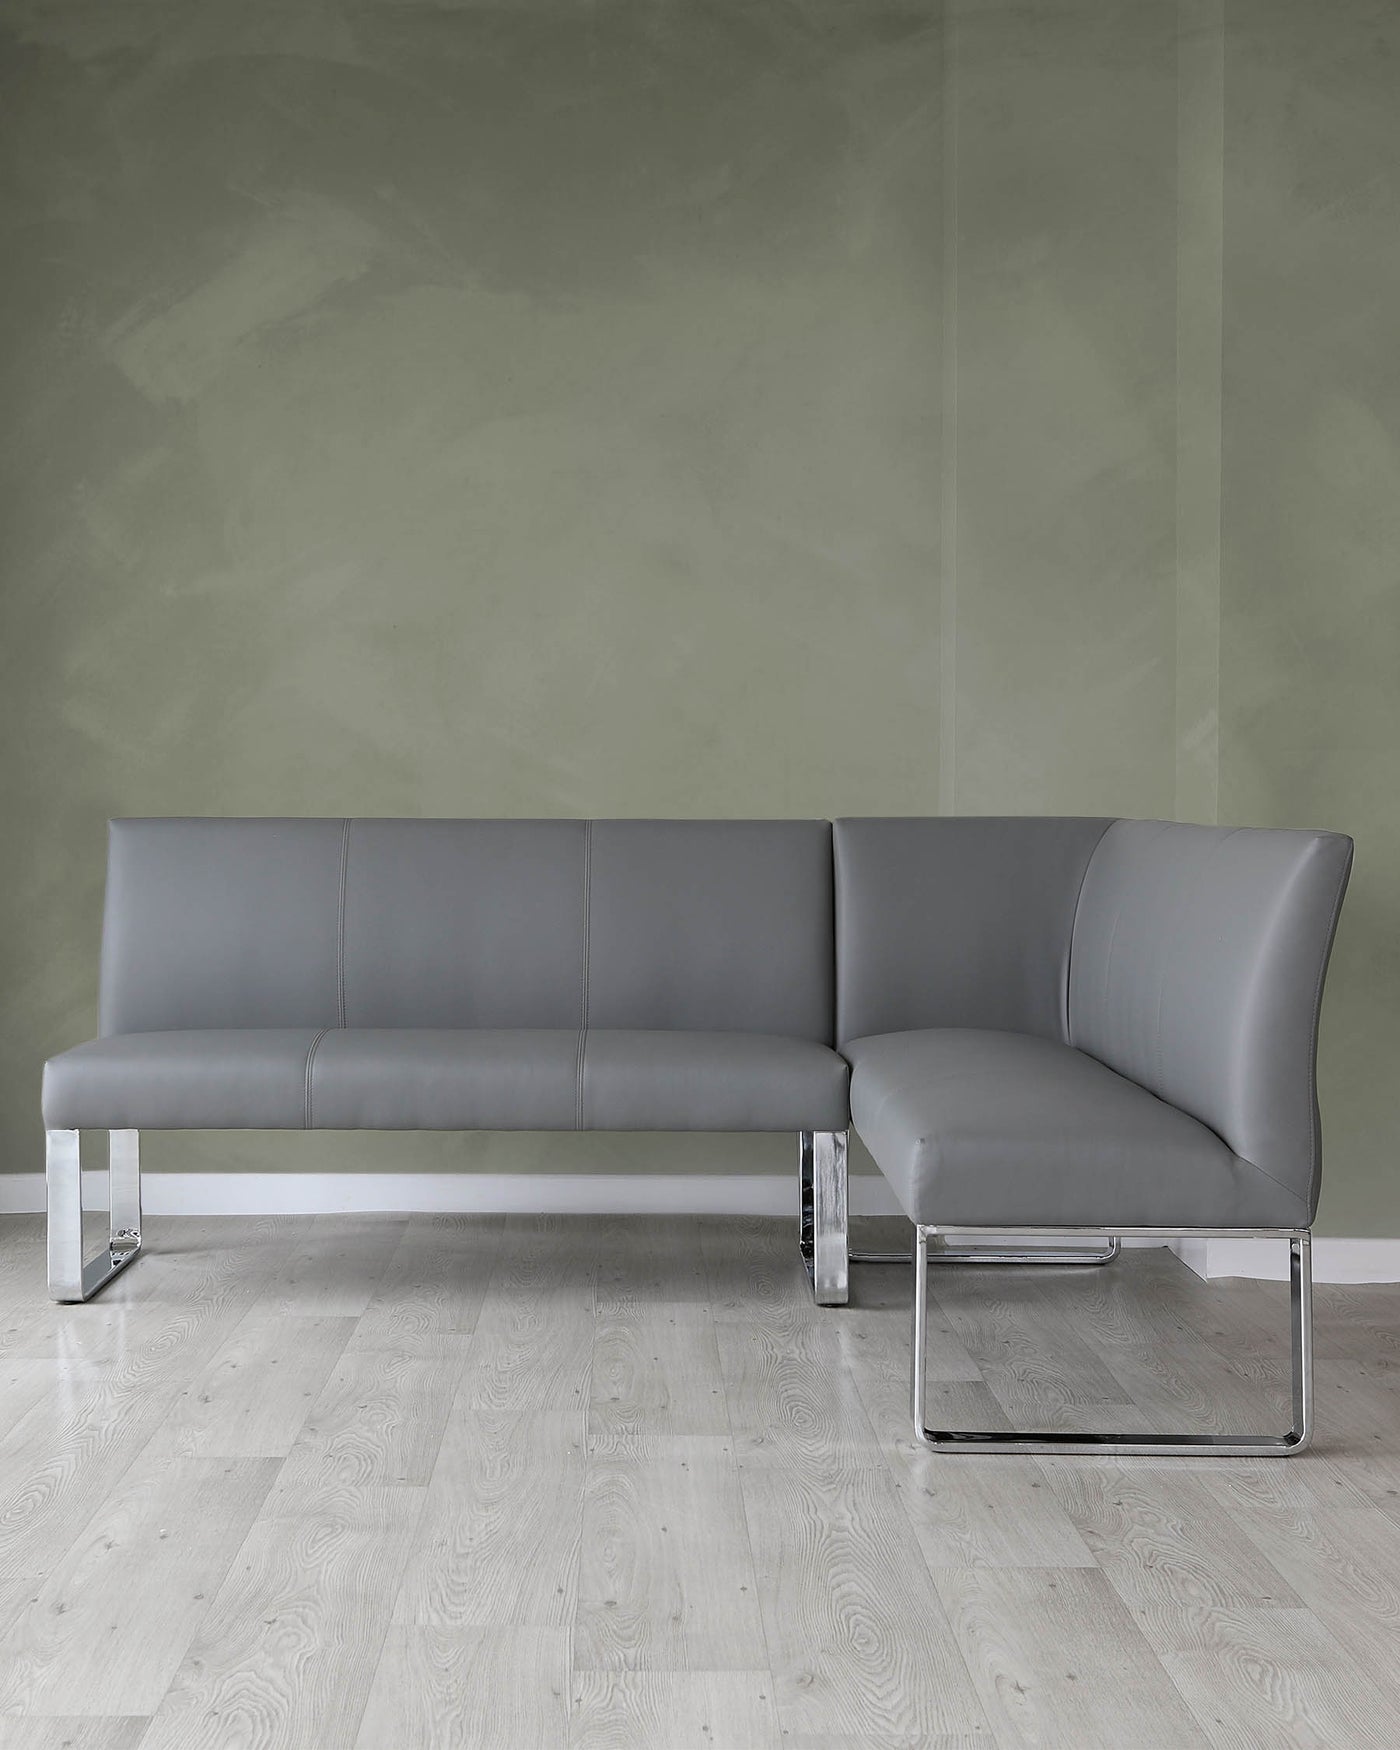 Modern grey L-shaped sectional sofa with sleek chrome legs, positioned against a textured green wall on a light wooden floor.